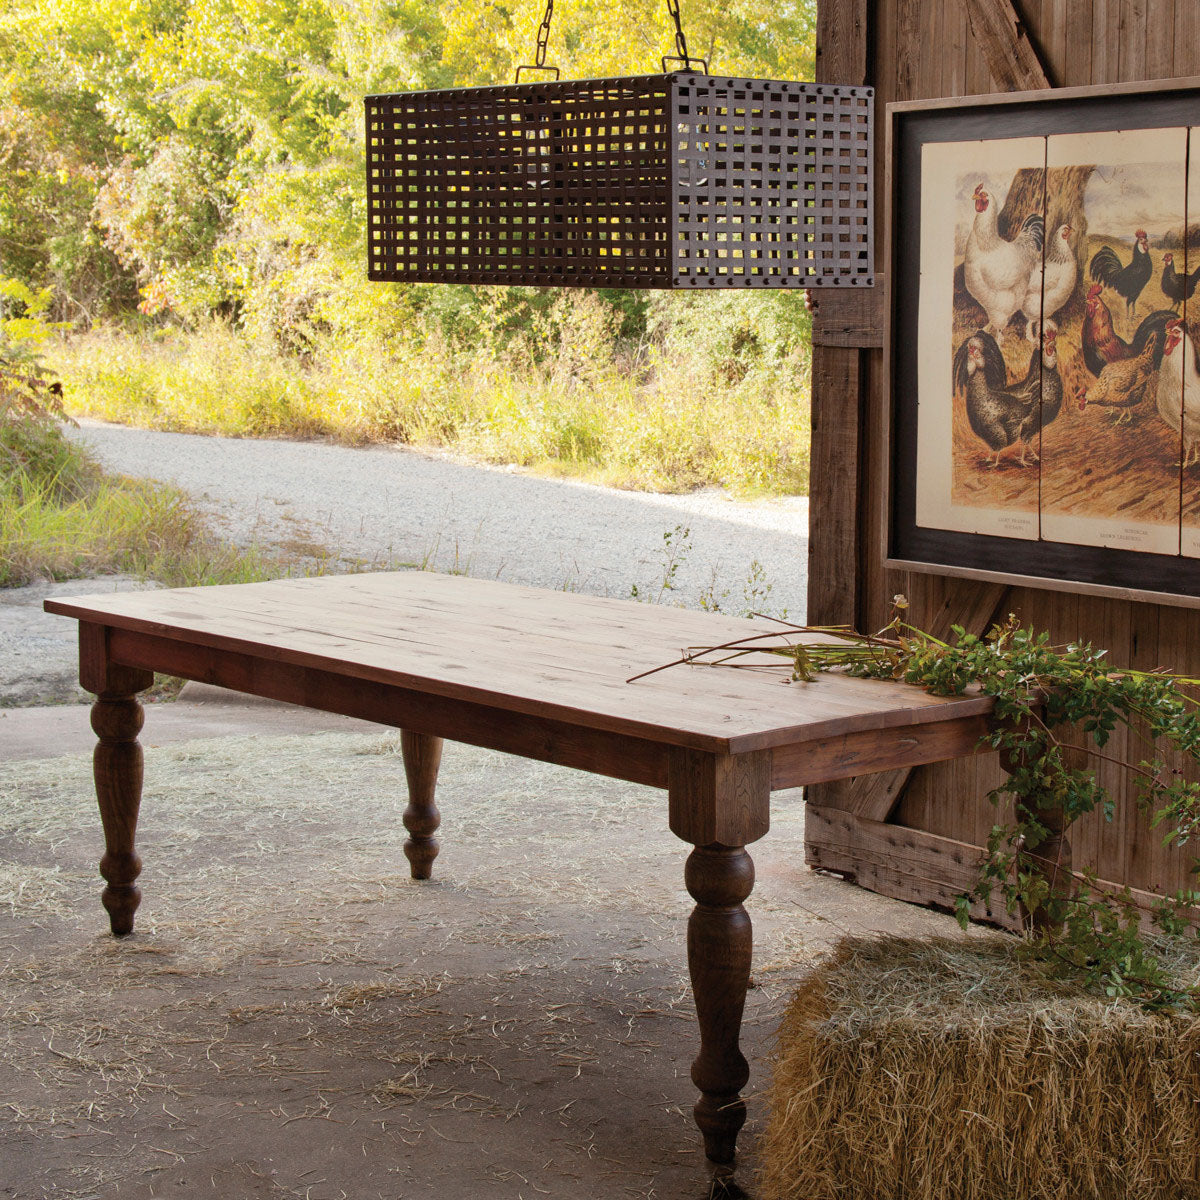 The Olde Farm Table - More Coming!